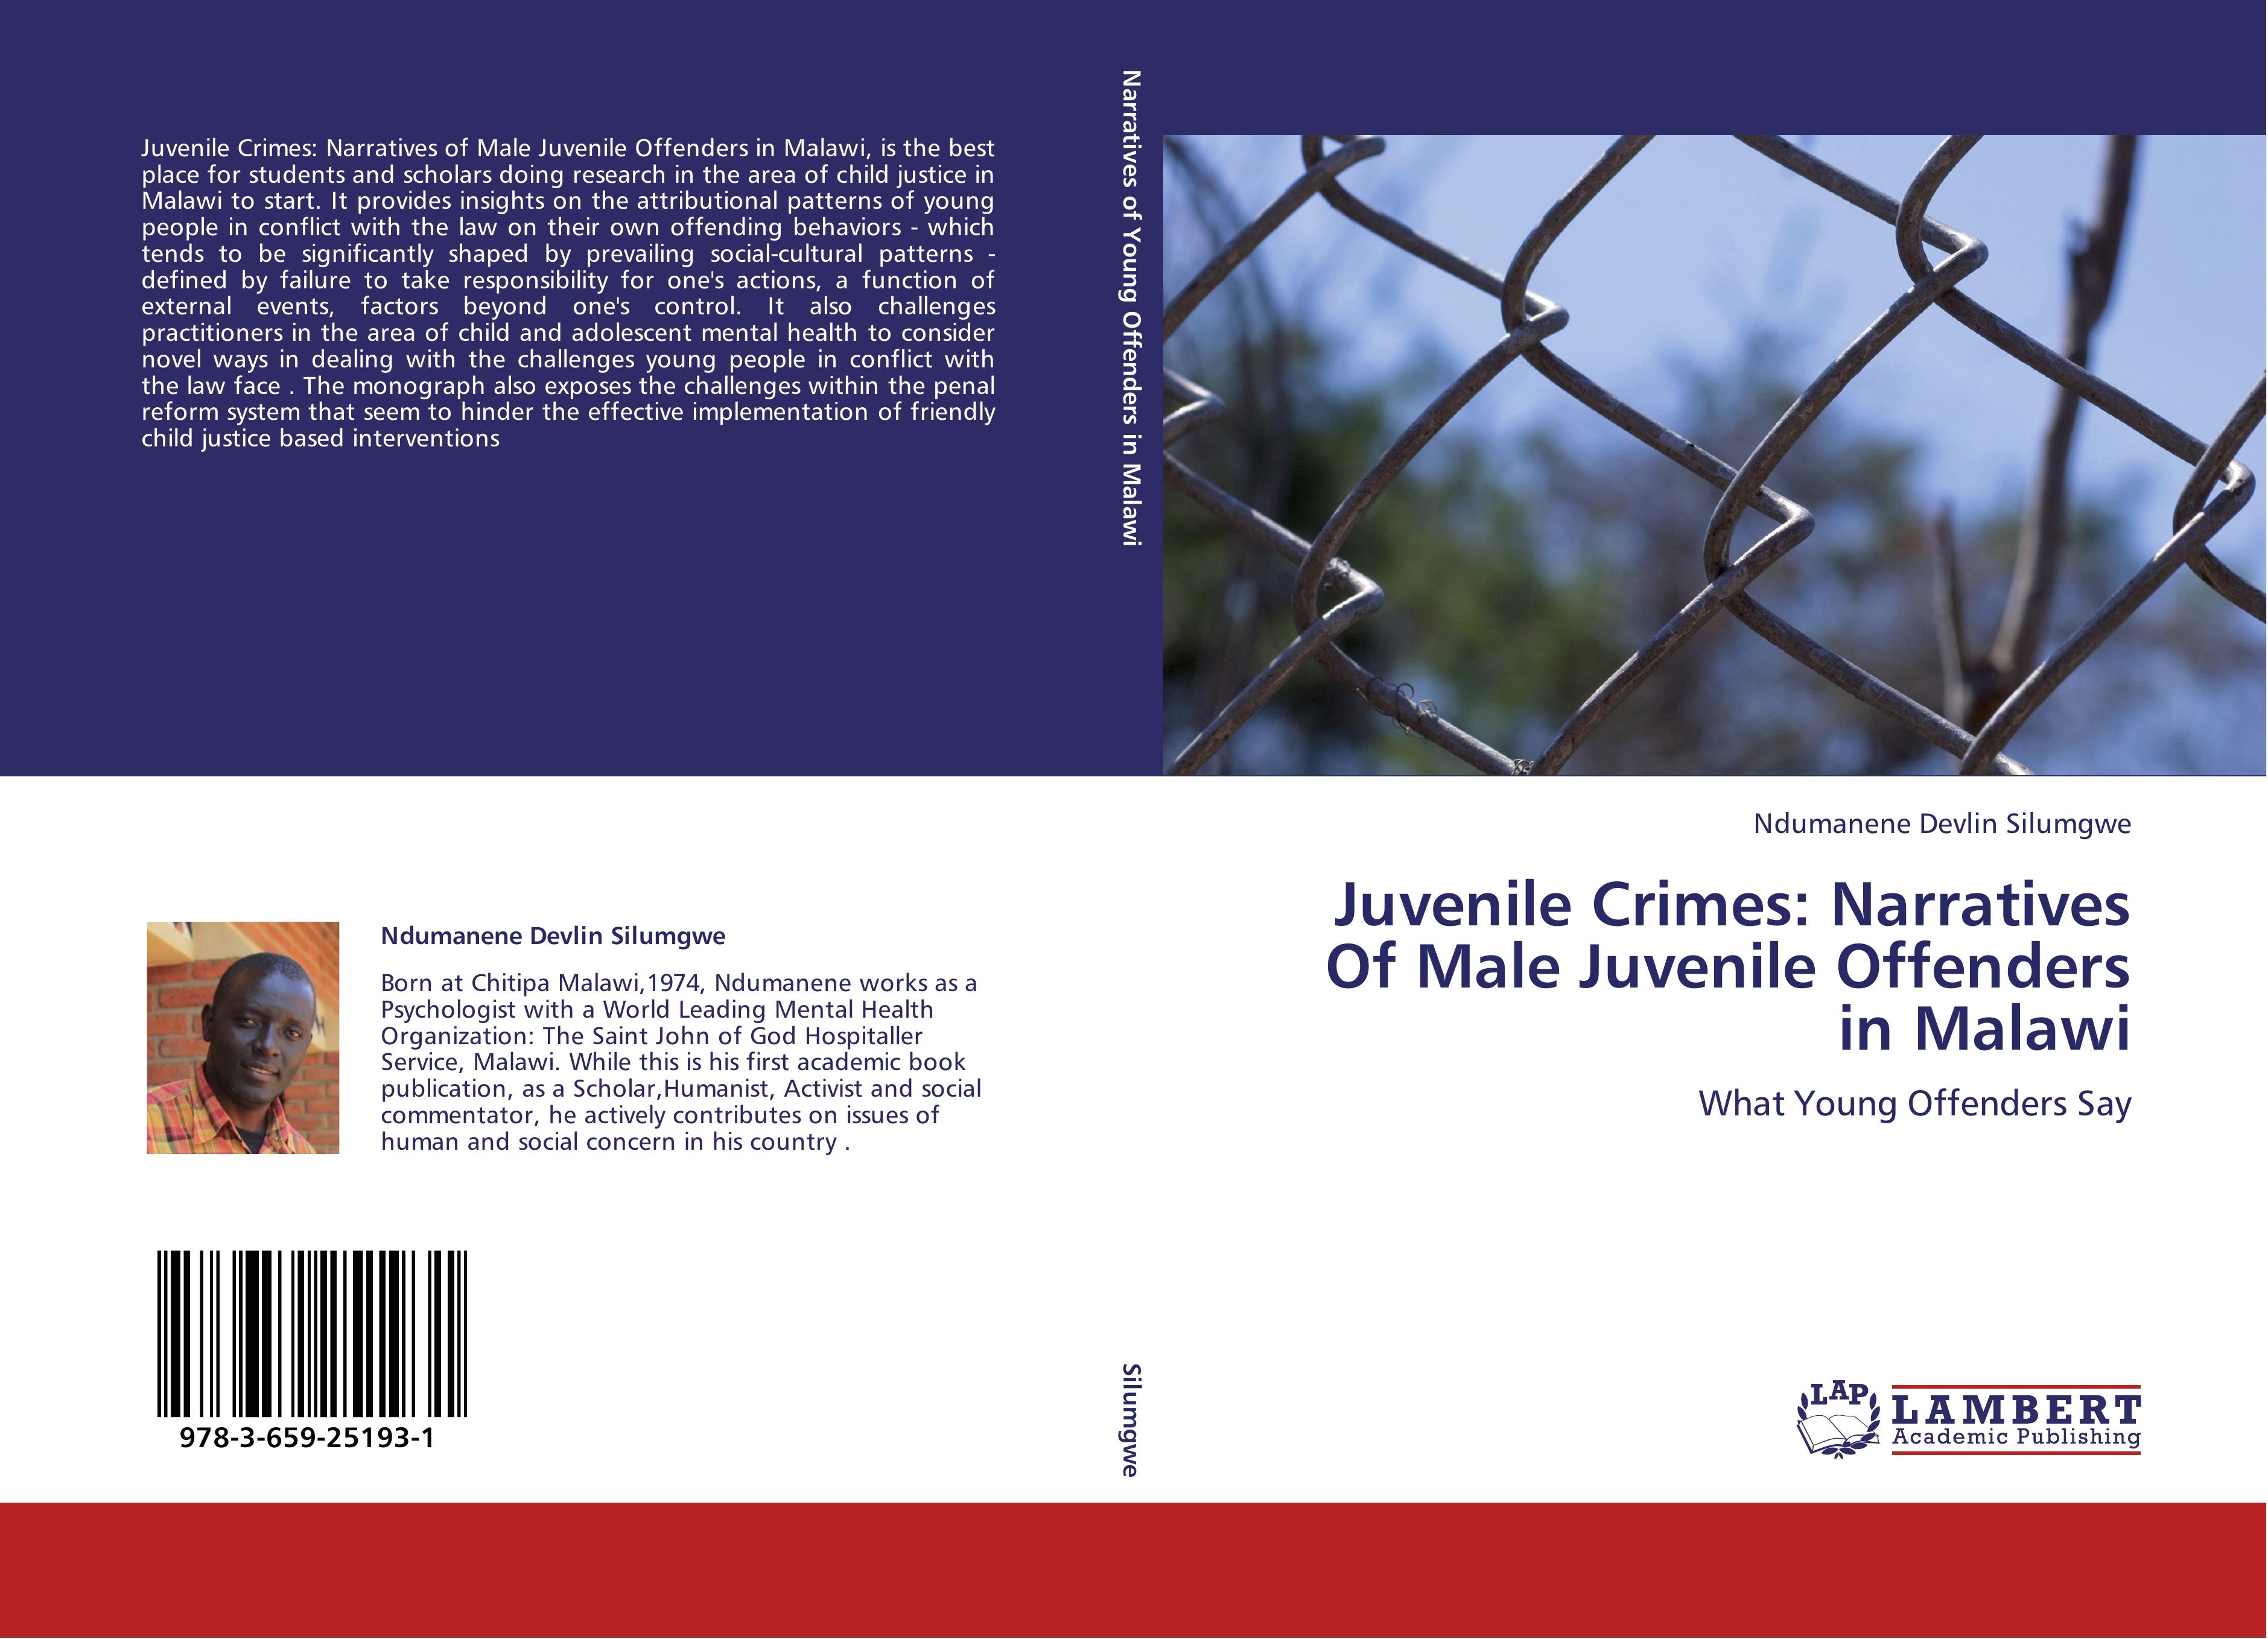 Juvenile Crimes: Narratives Of Male Juvenile Offenders in Malawi / What Young Offenders Say / Ndumanene Devlin Silumgwe / Taschenbuch / Paperback / 136 S. / Englisch / 2012 / EAN 9783659251931 - Silumgwe, Ndumanene Devlin